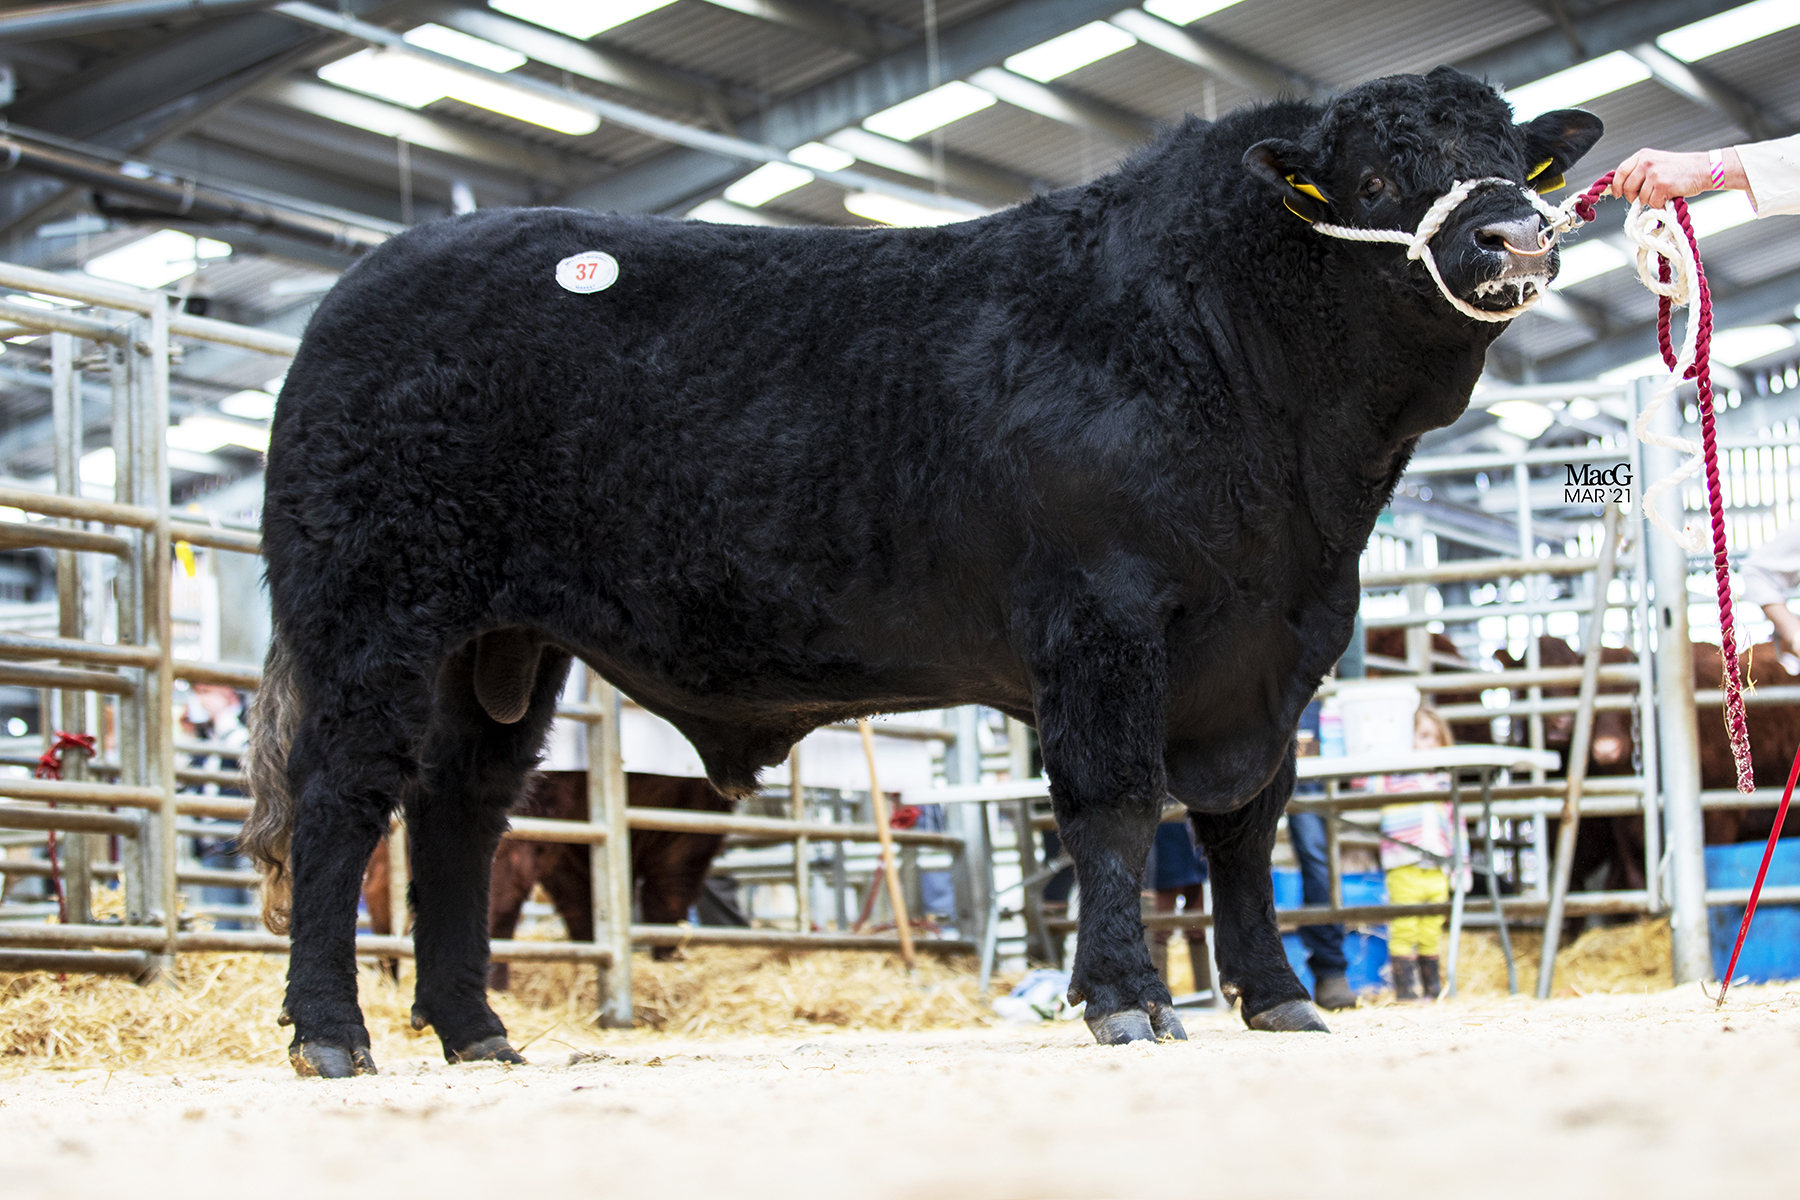 This Saler bull, Rigel O’Toole Blk sold for 3200gns 